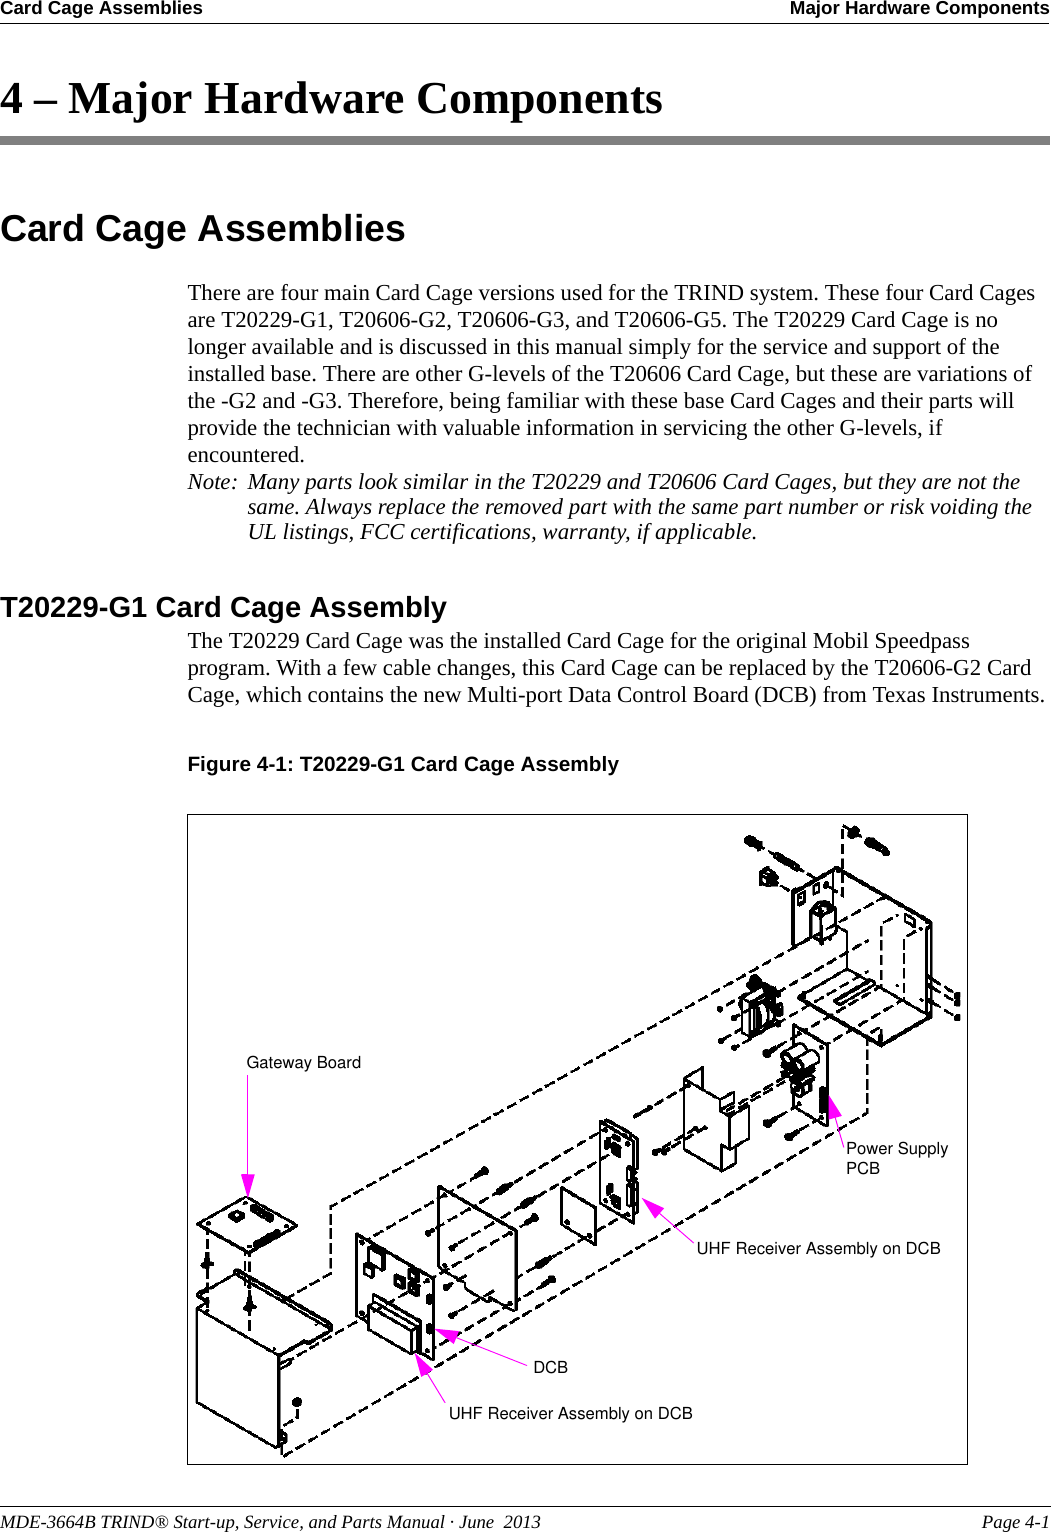 MDE-3664B TRIND® Start-up, Service, and Parts Manual · June  2013 Page 4-1Card Cage Assemblies Major Hardware Components4 – Major Hardware ComponentsCard Cage AssembliesThere are four main Card Cage versions used for the TRIND system. These four Card Cages are T20229-G1, T20606-G2, T20606-G3, and T20606-G5. The T20229 Card Cage is no longer available and is discussed in this manual simply for the service and support of the installed base. There are other G-levels of the T20606 Card Cage, but these are variations of the -G2 and -G3. Therefore, being familiar with these base Card Cages and their parts will provide the technician with valuable information in servicing the other G-levels, if encountered. Note: Many parts look similar in the T20229 and T20606 Card Cages, but they are not the same. Always replace the removed part with the same part number or risk voiding the UL listings, FCC certifications, warranty, if applicable.T20229-G1 Card Cage AssemblyThe T20229 Card Cage was the installed Card Cage for the original Mobil Speedpass program. With a few cable changes, this Card Cage can be replaced by the T20606-G2 Card Cage, which contains the new Multi-port Data Control Board (DCB) from Texas Instruments.Figure 4-1: T20229-G1 Card Cage AssemblyPower Supply PCBUHF Receiver Assembly on DCBDCBGateway BoardUHF Receiver Assembly on DCB